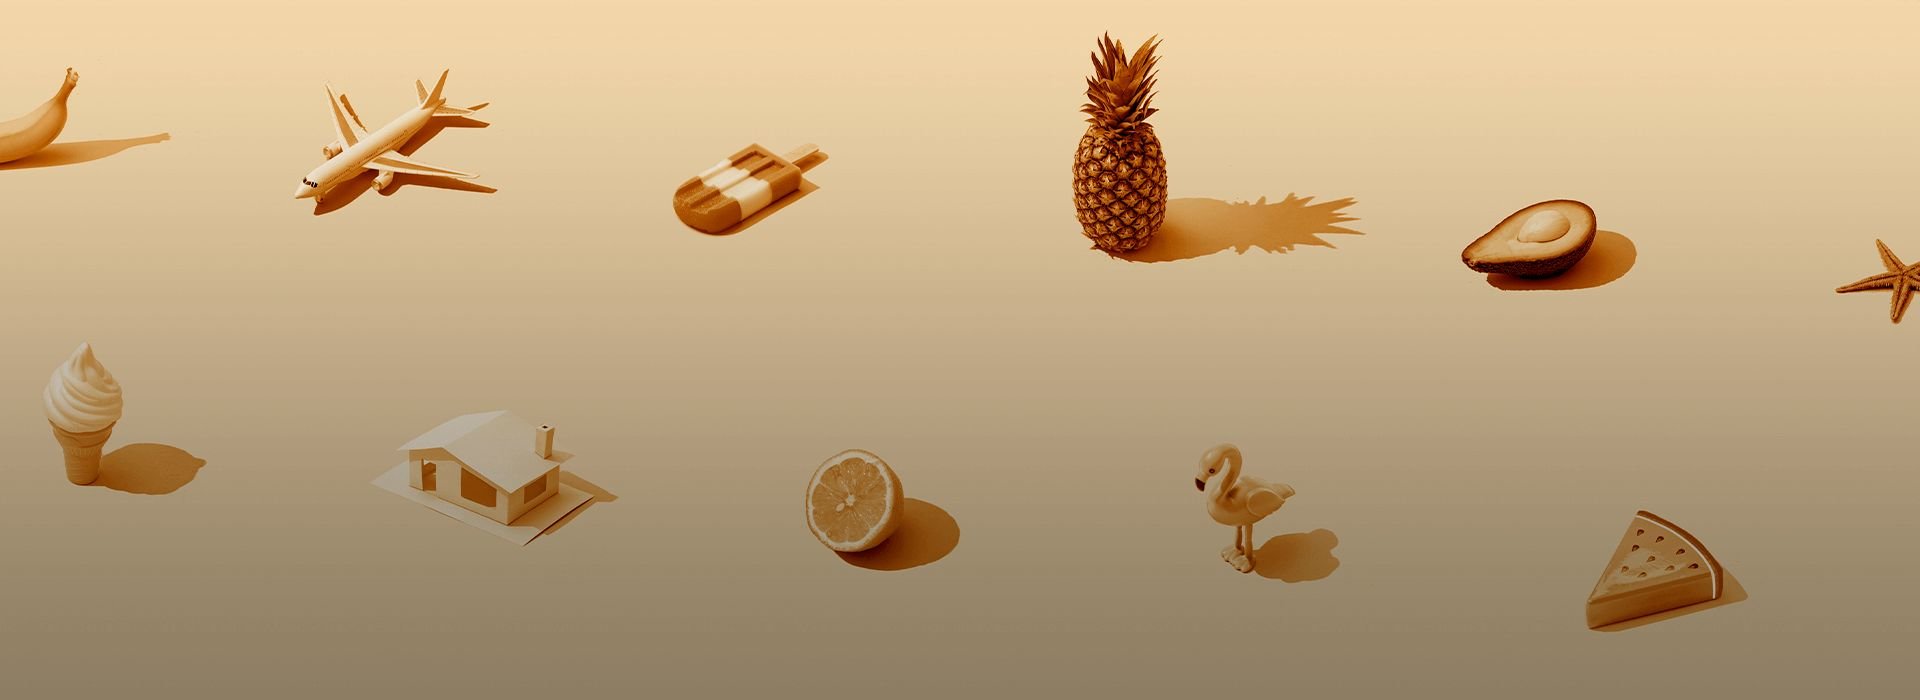 A miniatures of different objects